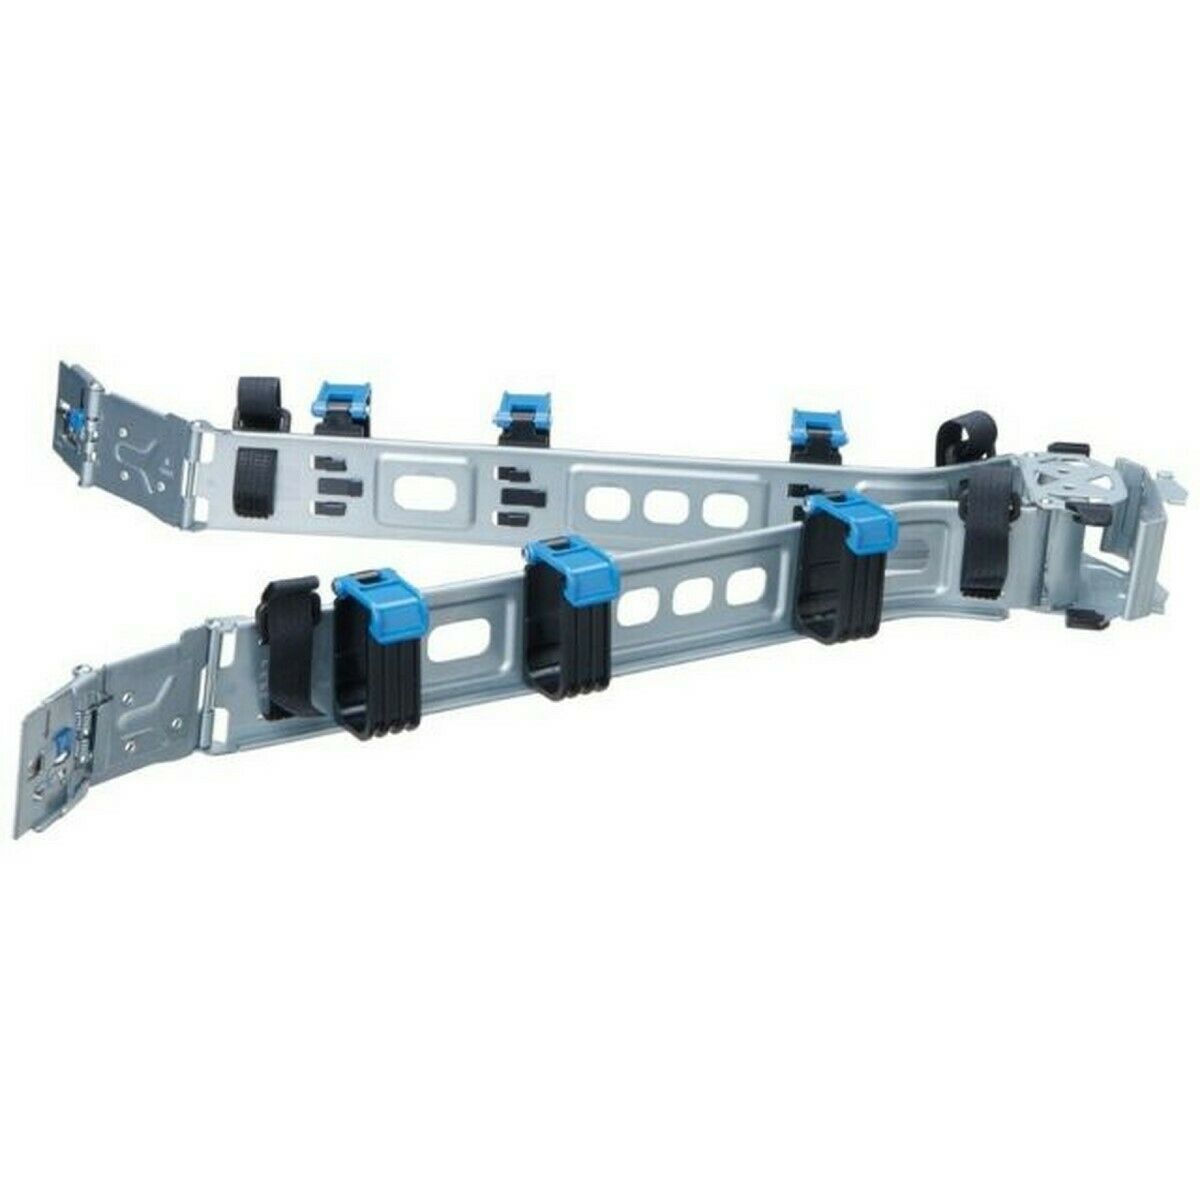 744116-001 Assy Cma 2u G9 Cable Management Arm For Easy Install Rail Kit